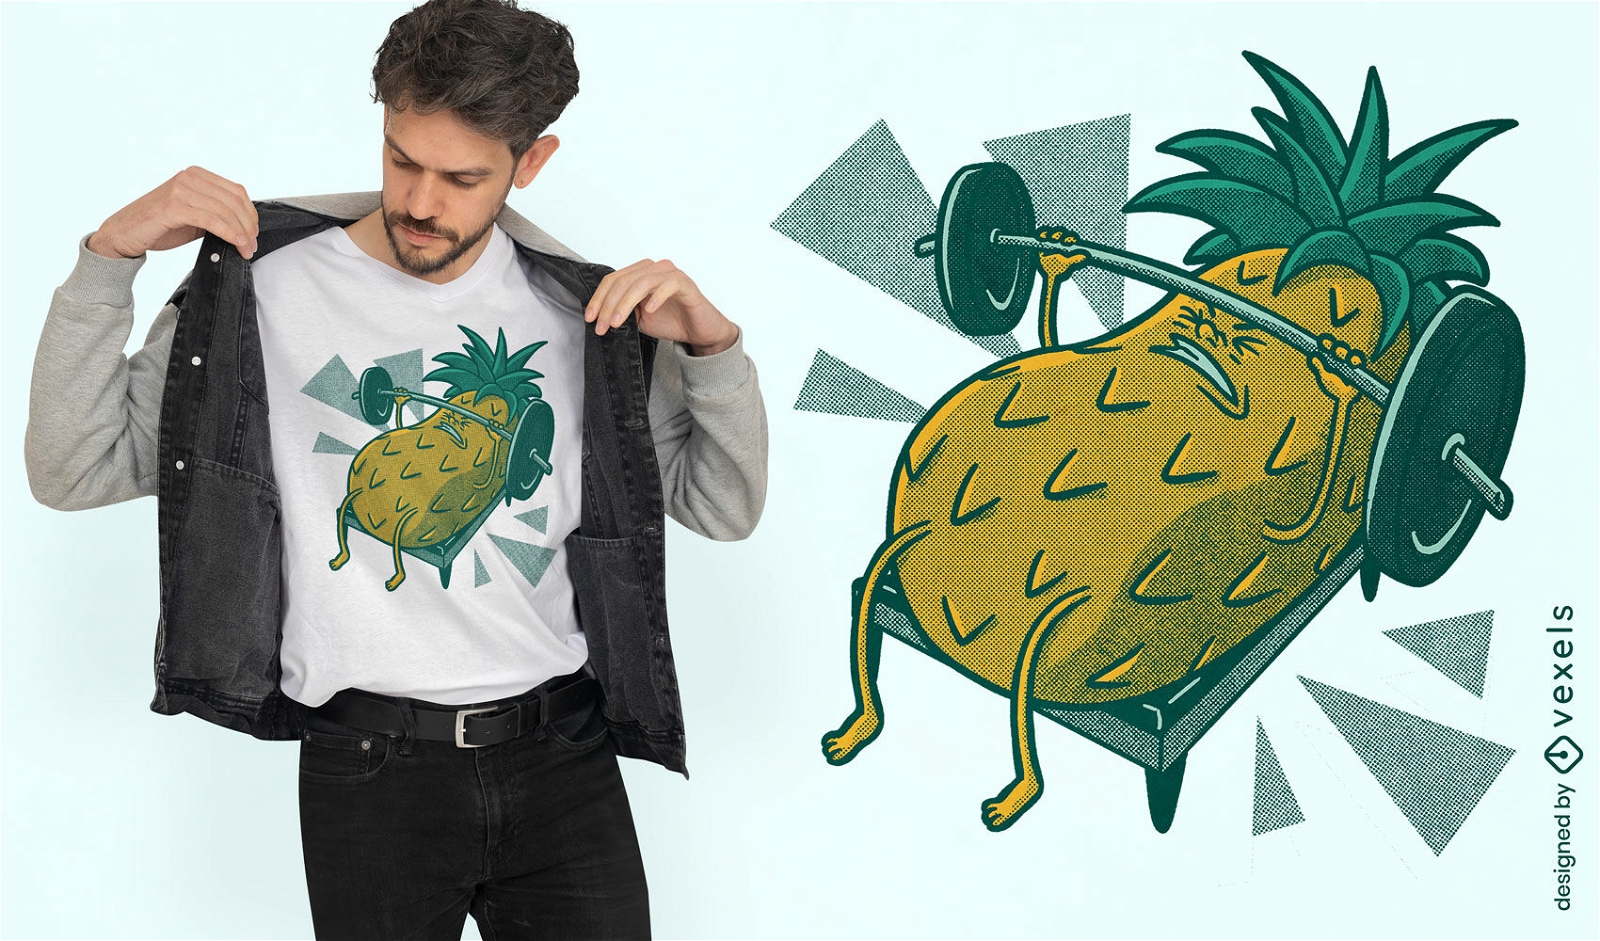 Pineapple at the gym t-shirt design